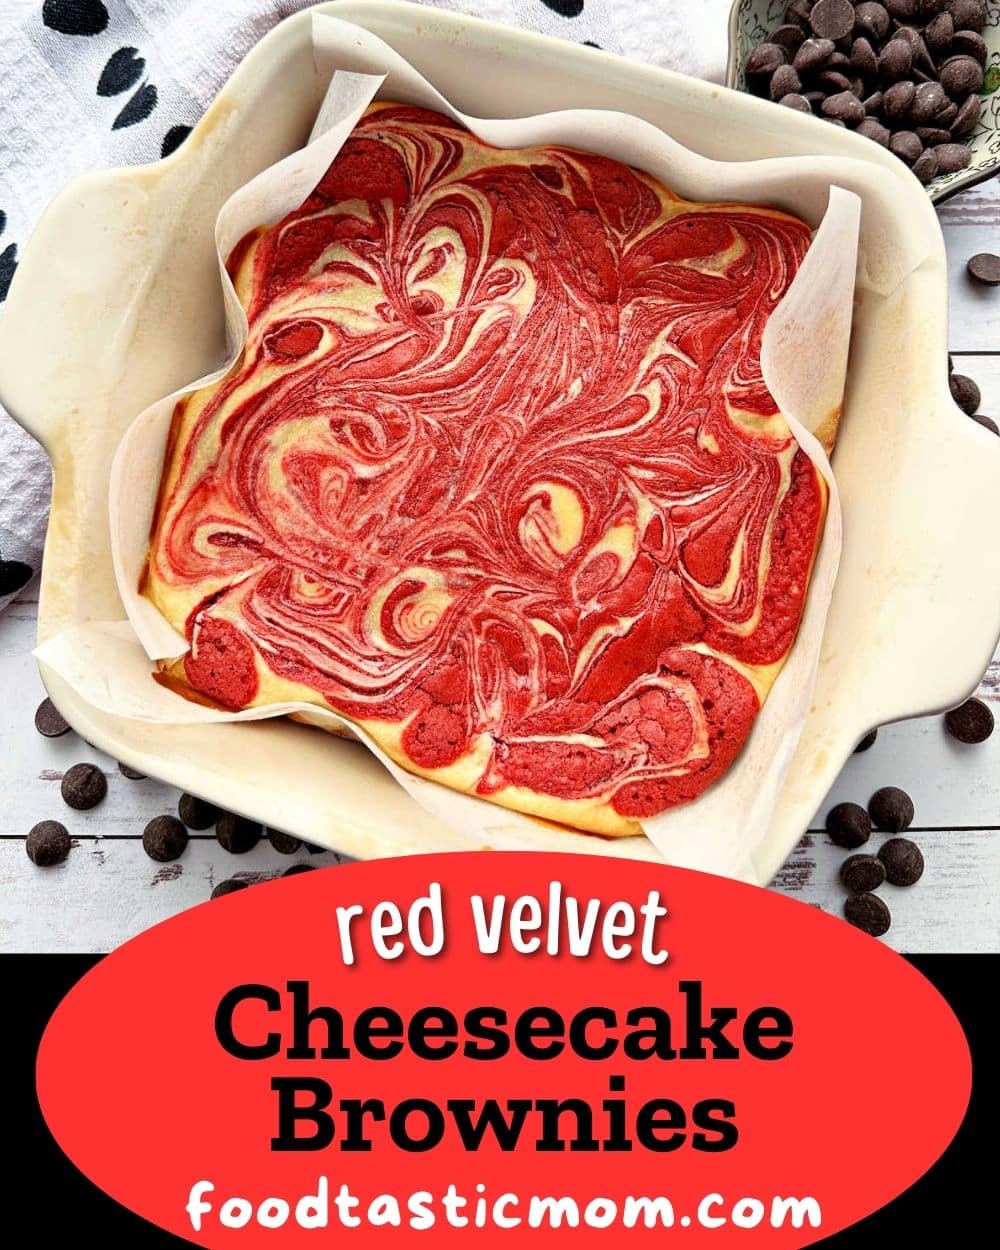 Red velvet brownie batter and tangy cream cheese swirls together in these easy, outstandingly delicious and decadent red velvet cheesecake brownies. via @foodtasticmom